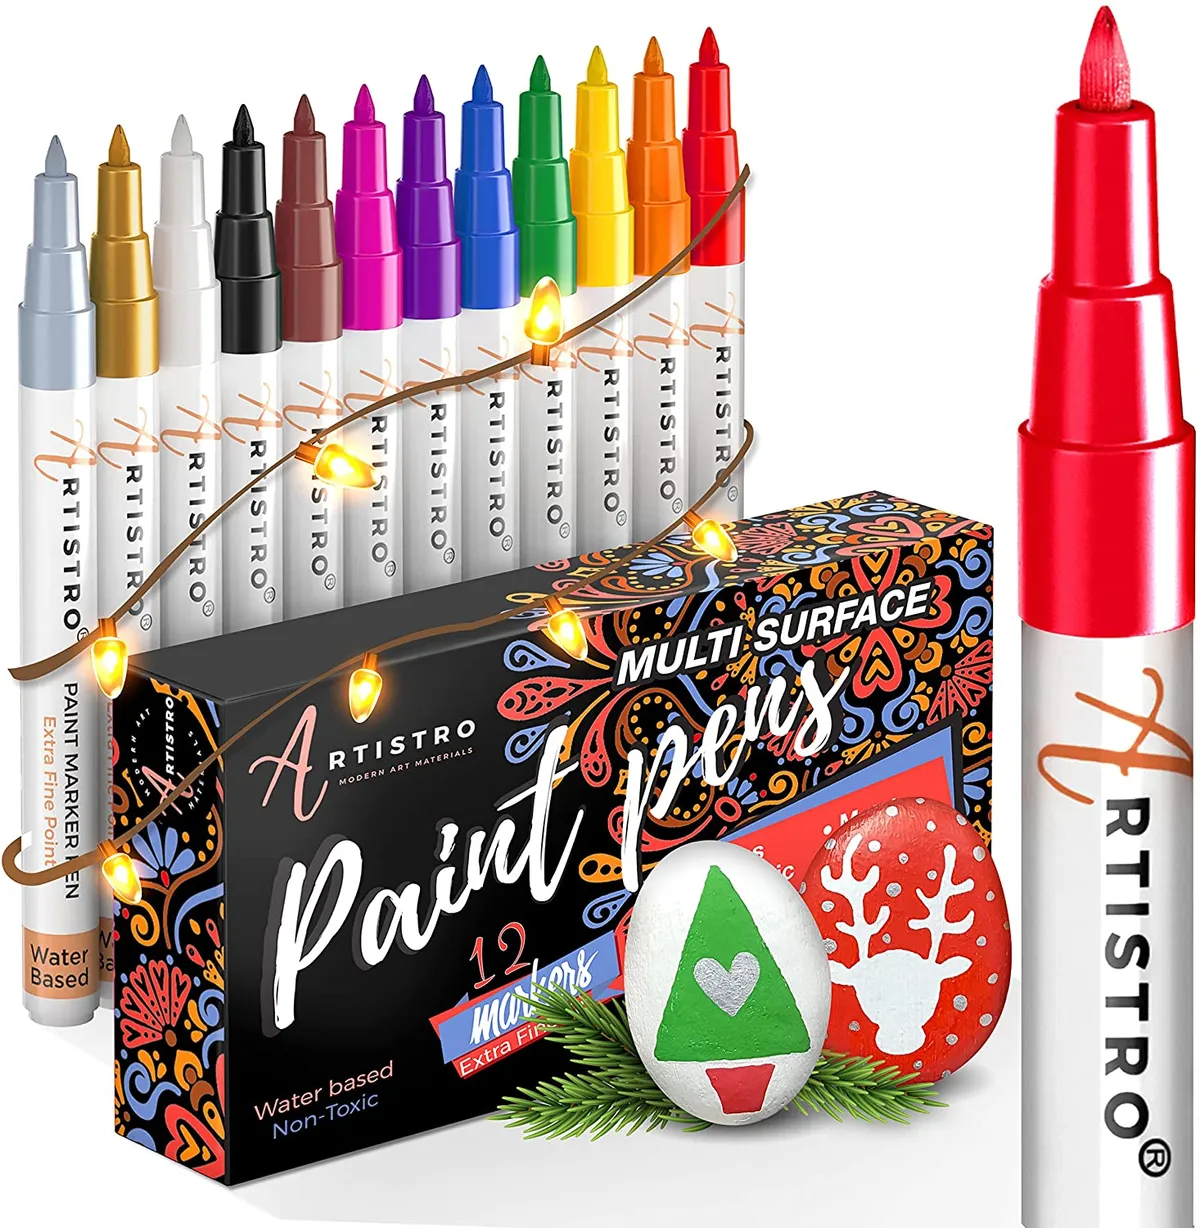 Pottery painting supplies paint pens